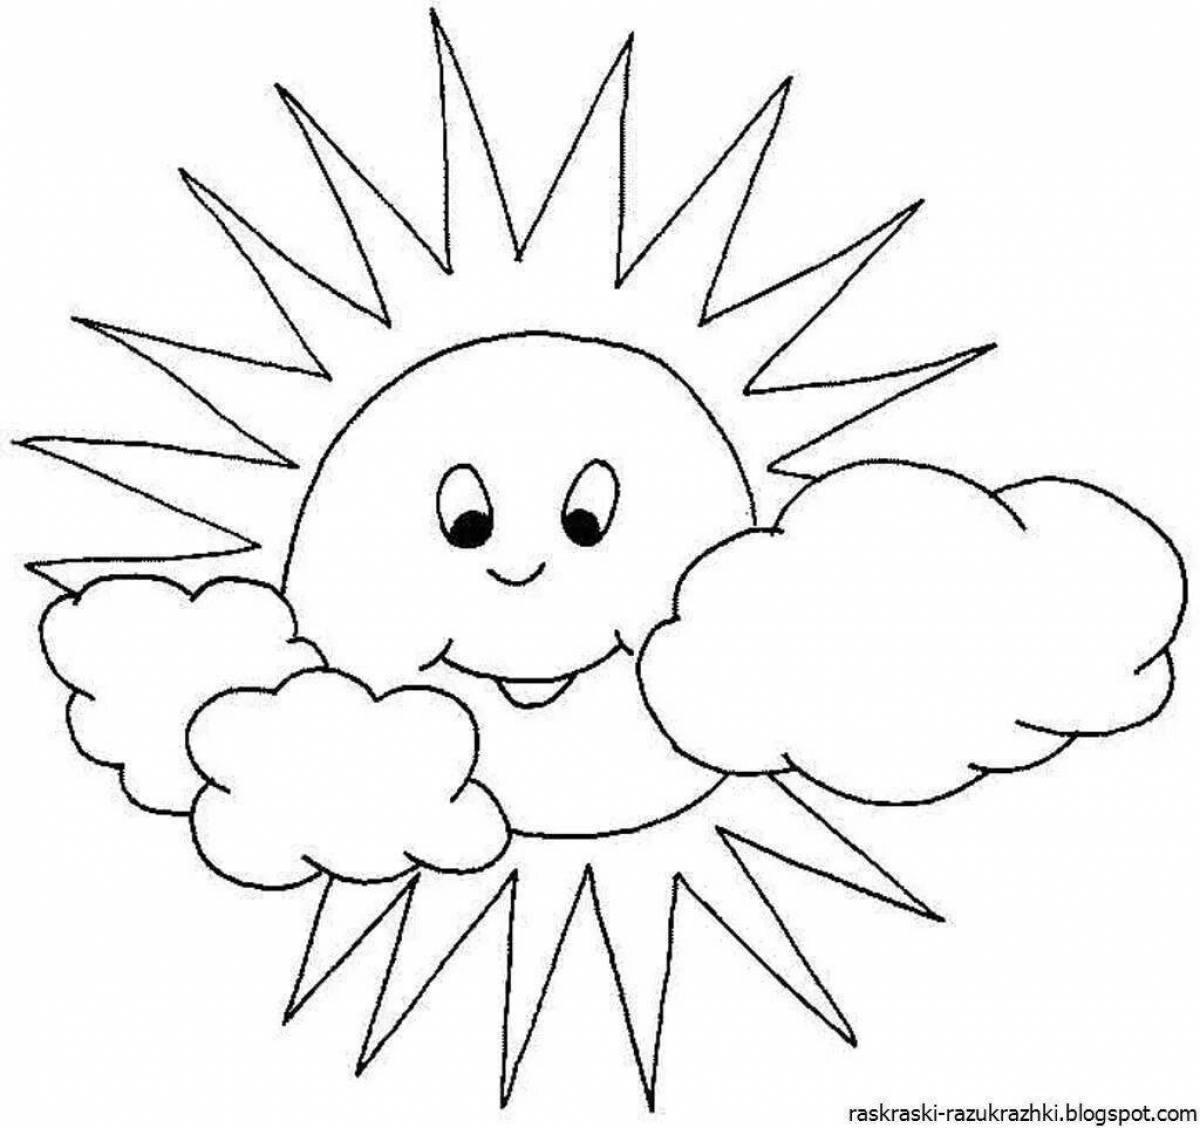 Delightful coloring of the sun with a smile